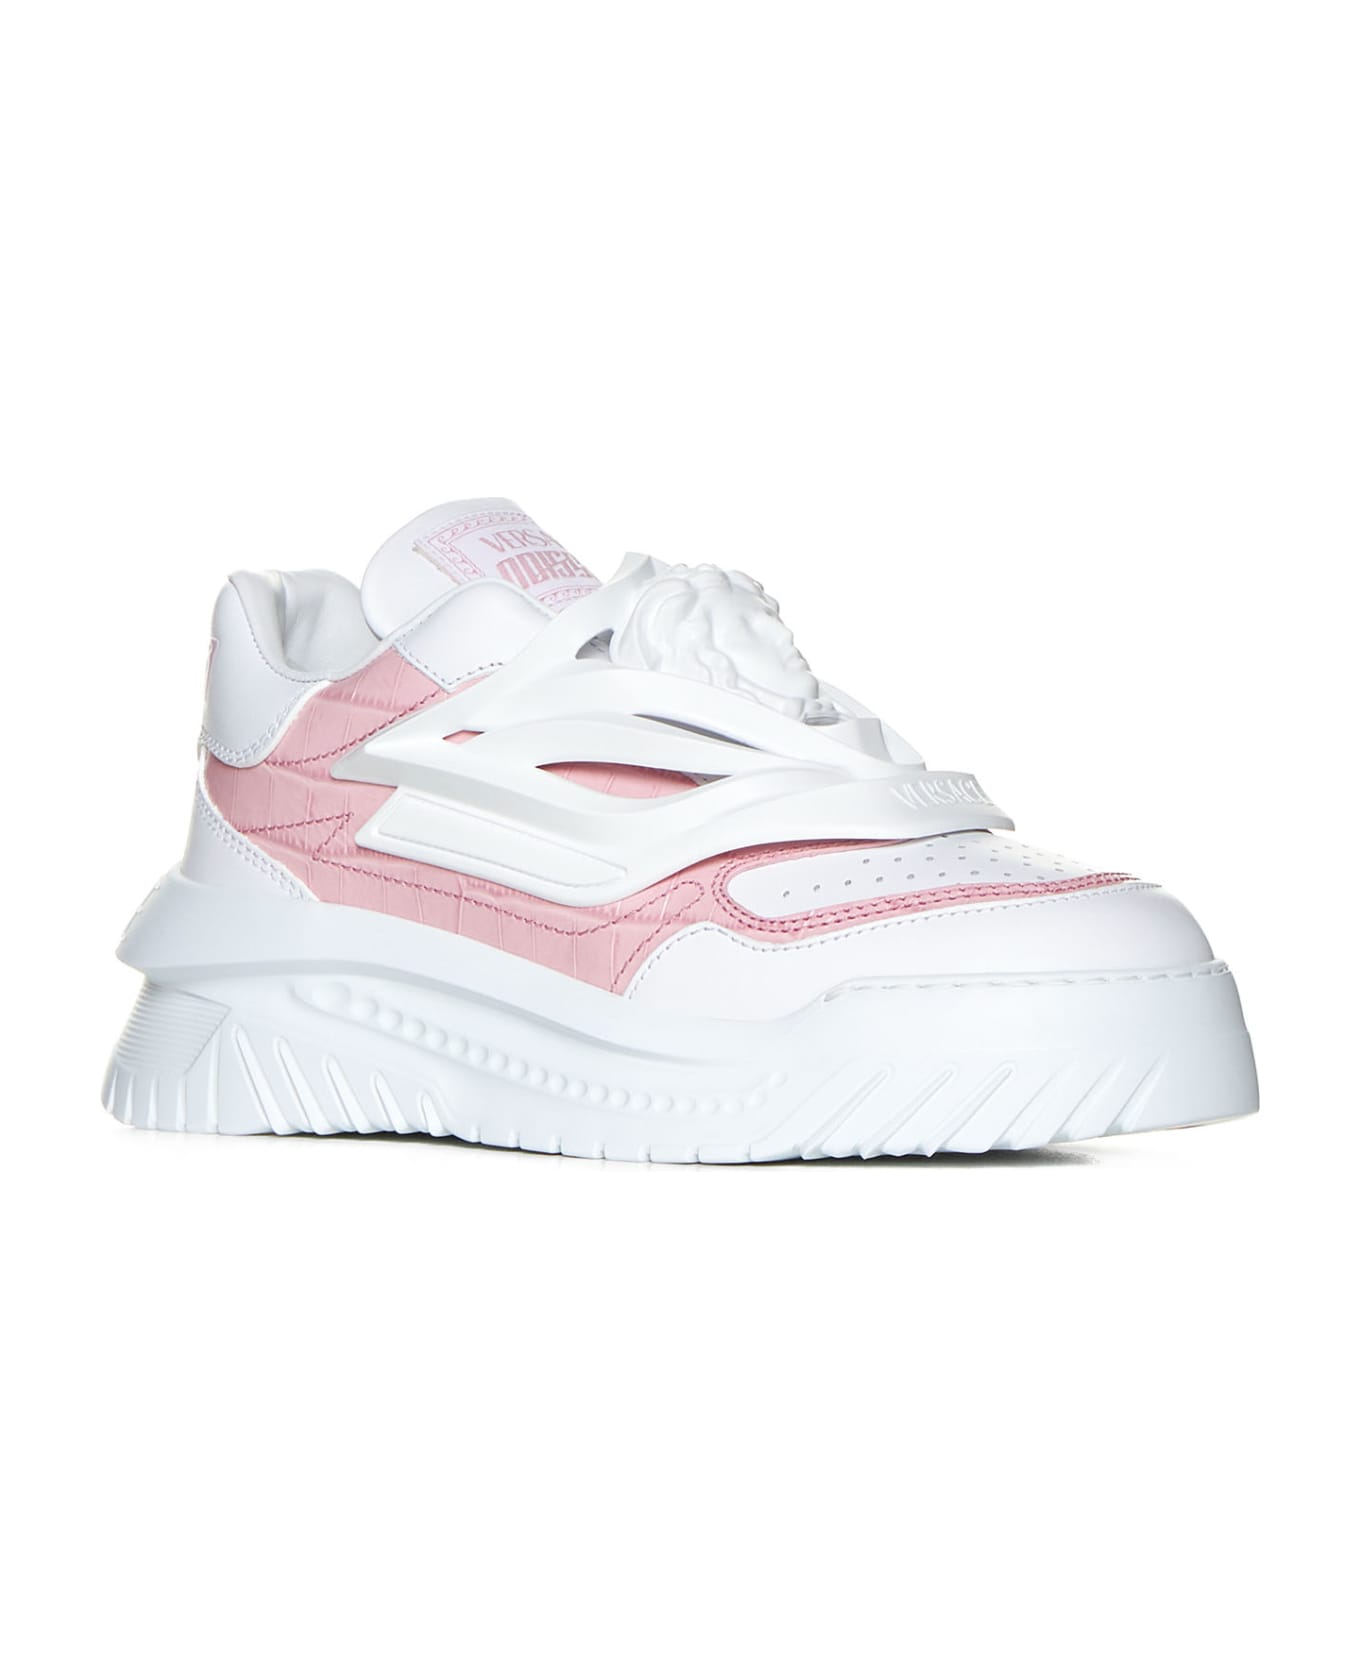 Versace 'odissea' Sneakers - White+english rose スニーカー